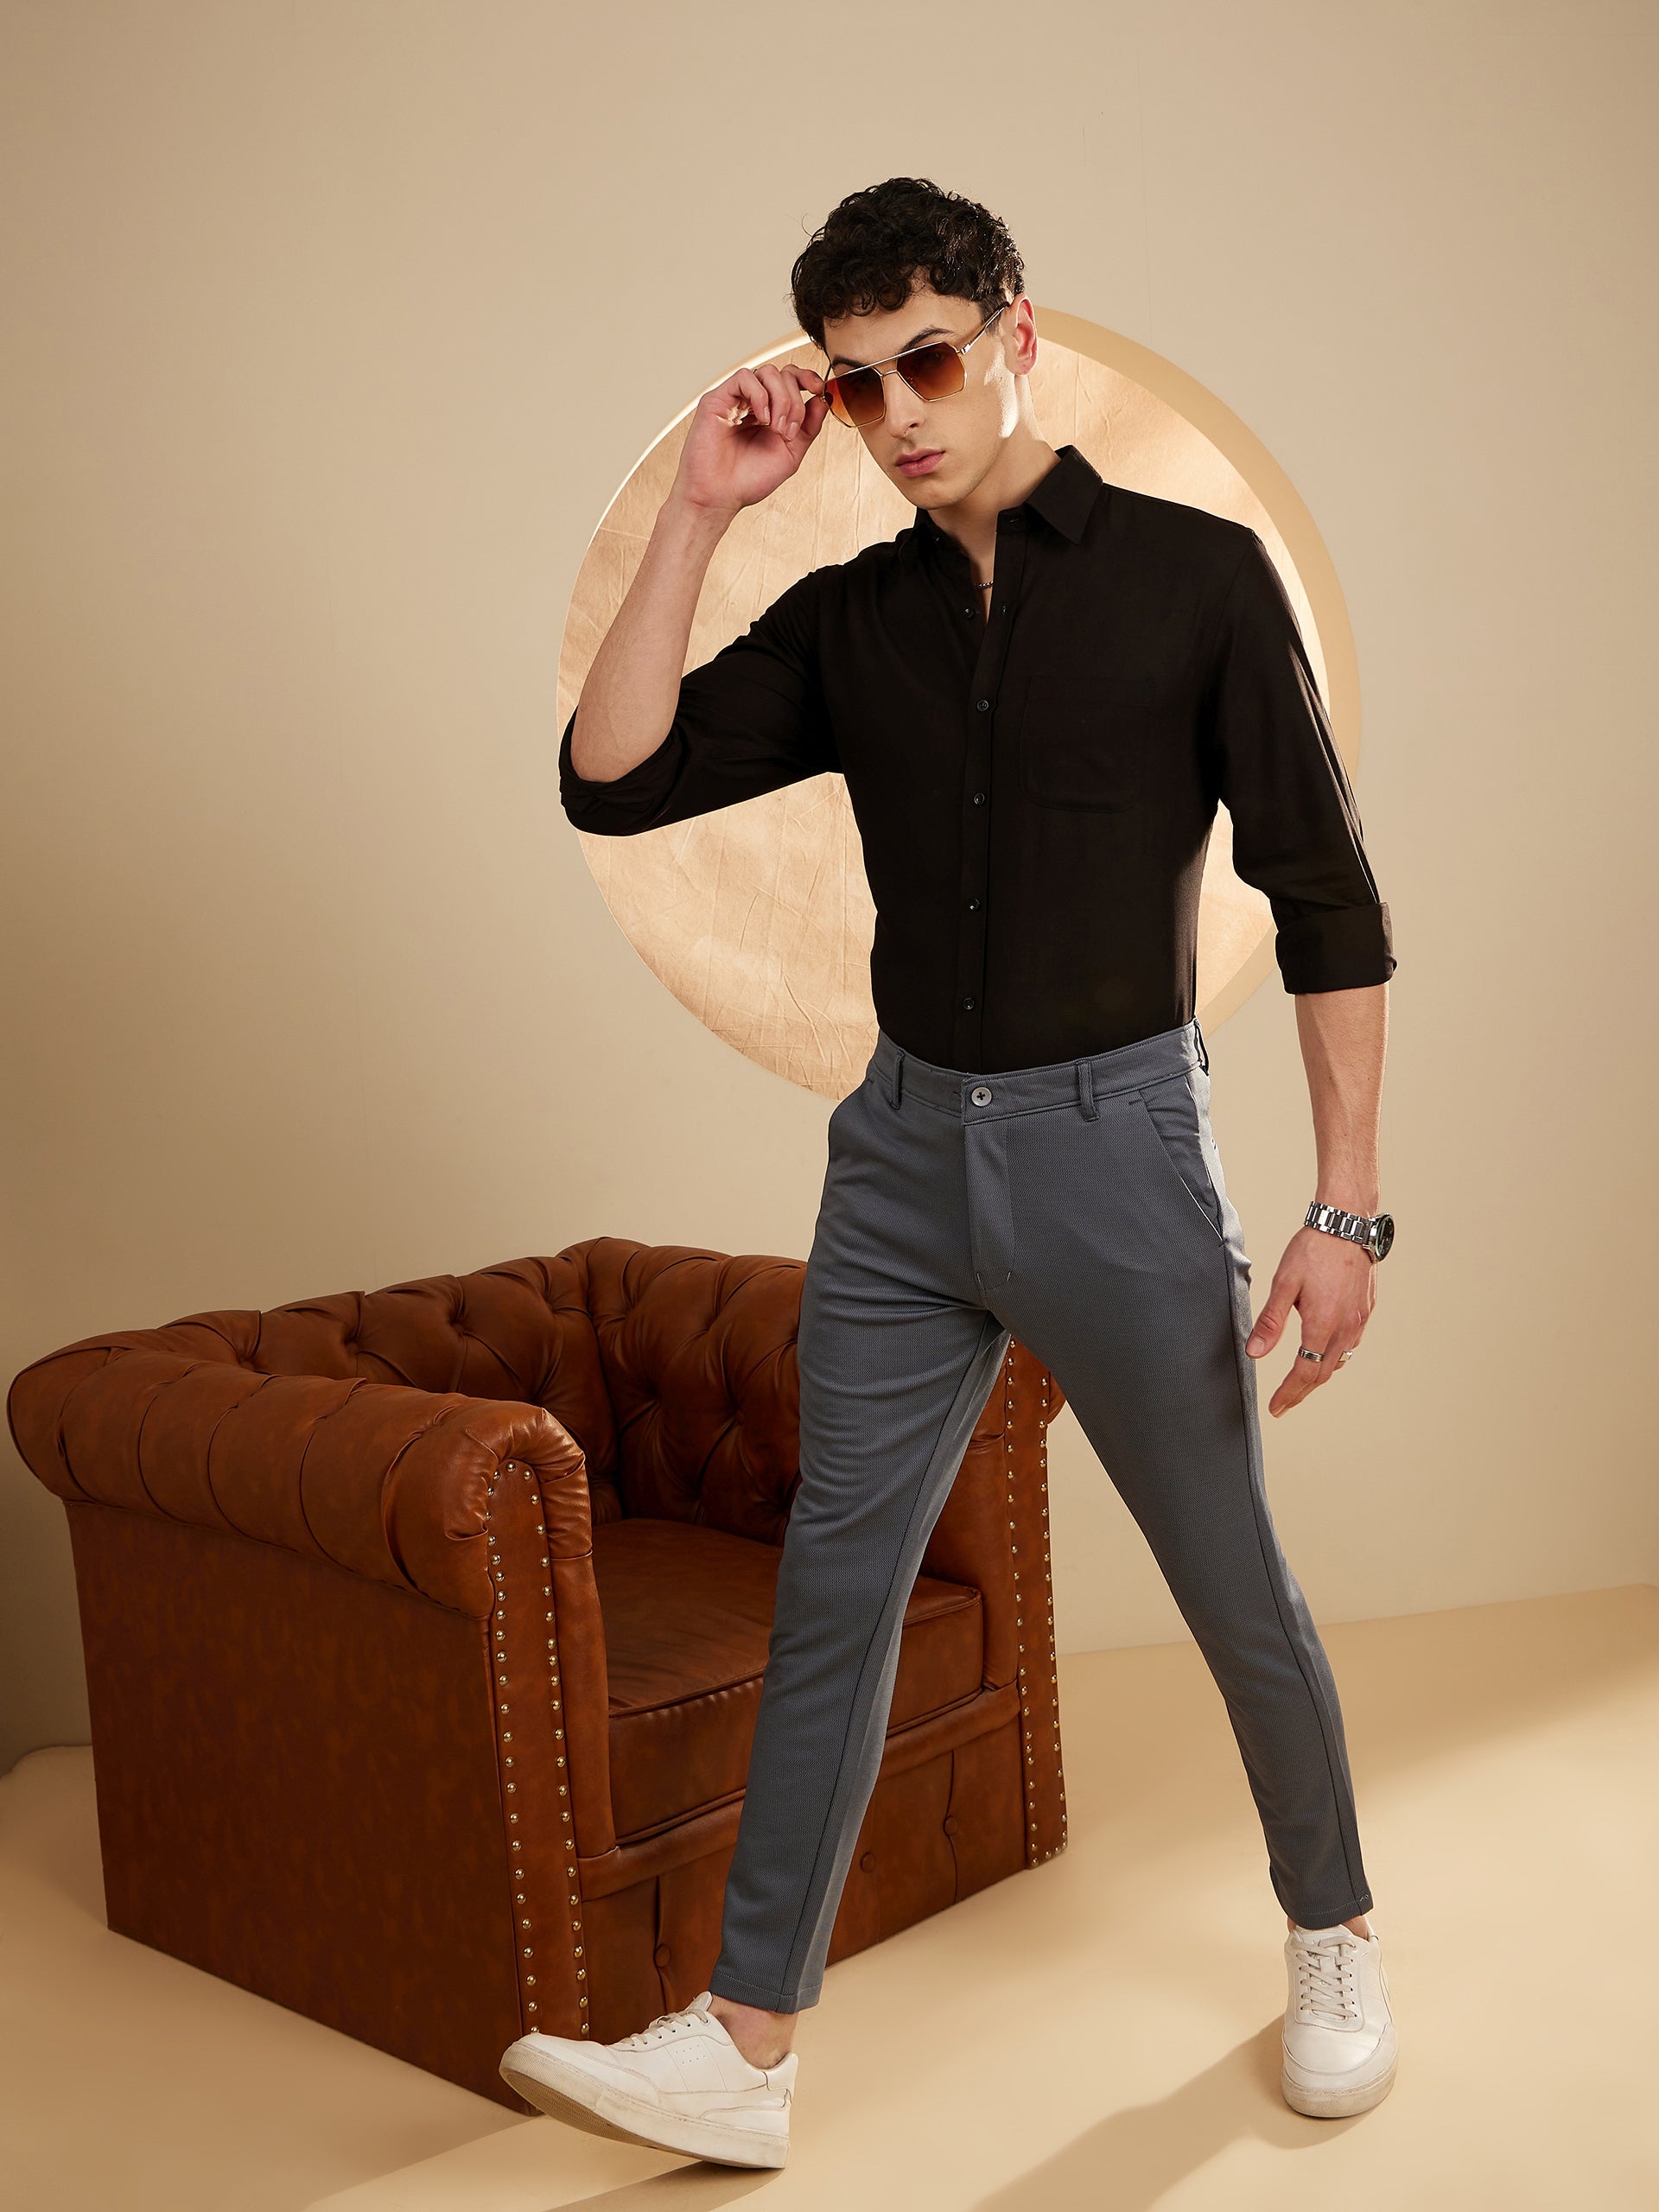 Buy Allen Solly Men Slim fit Formal Shirt - Black Online at Low Prices in  India - Paytmmall.com